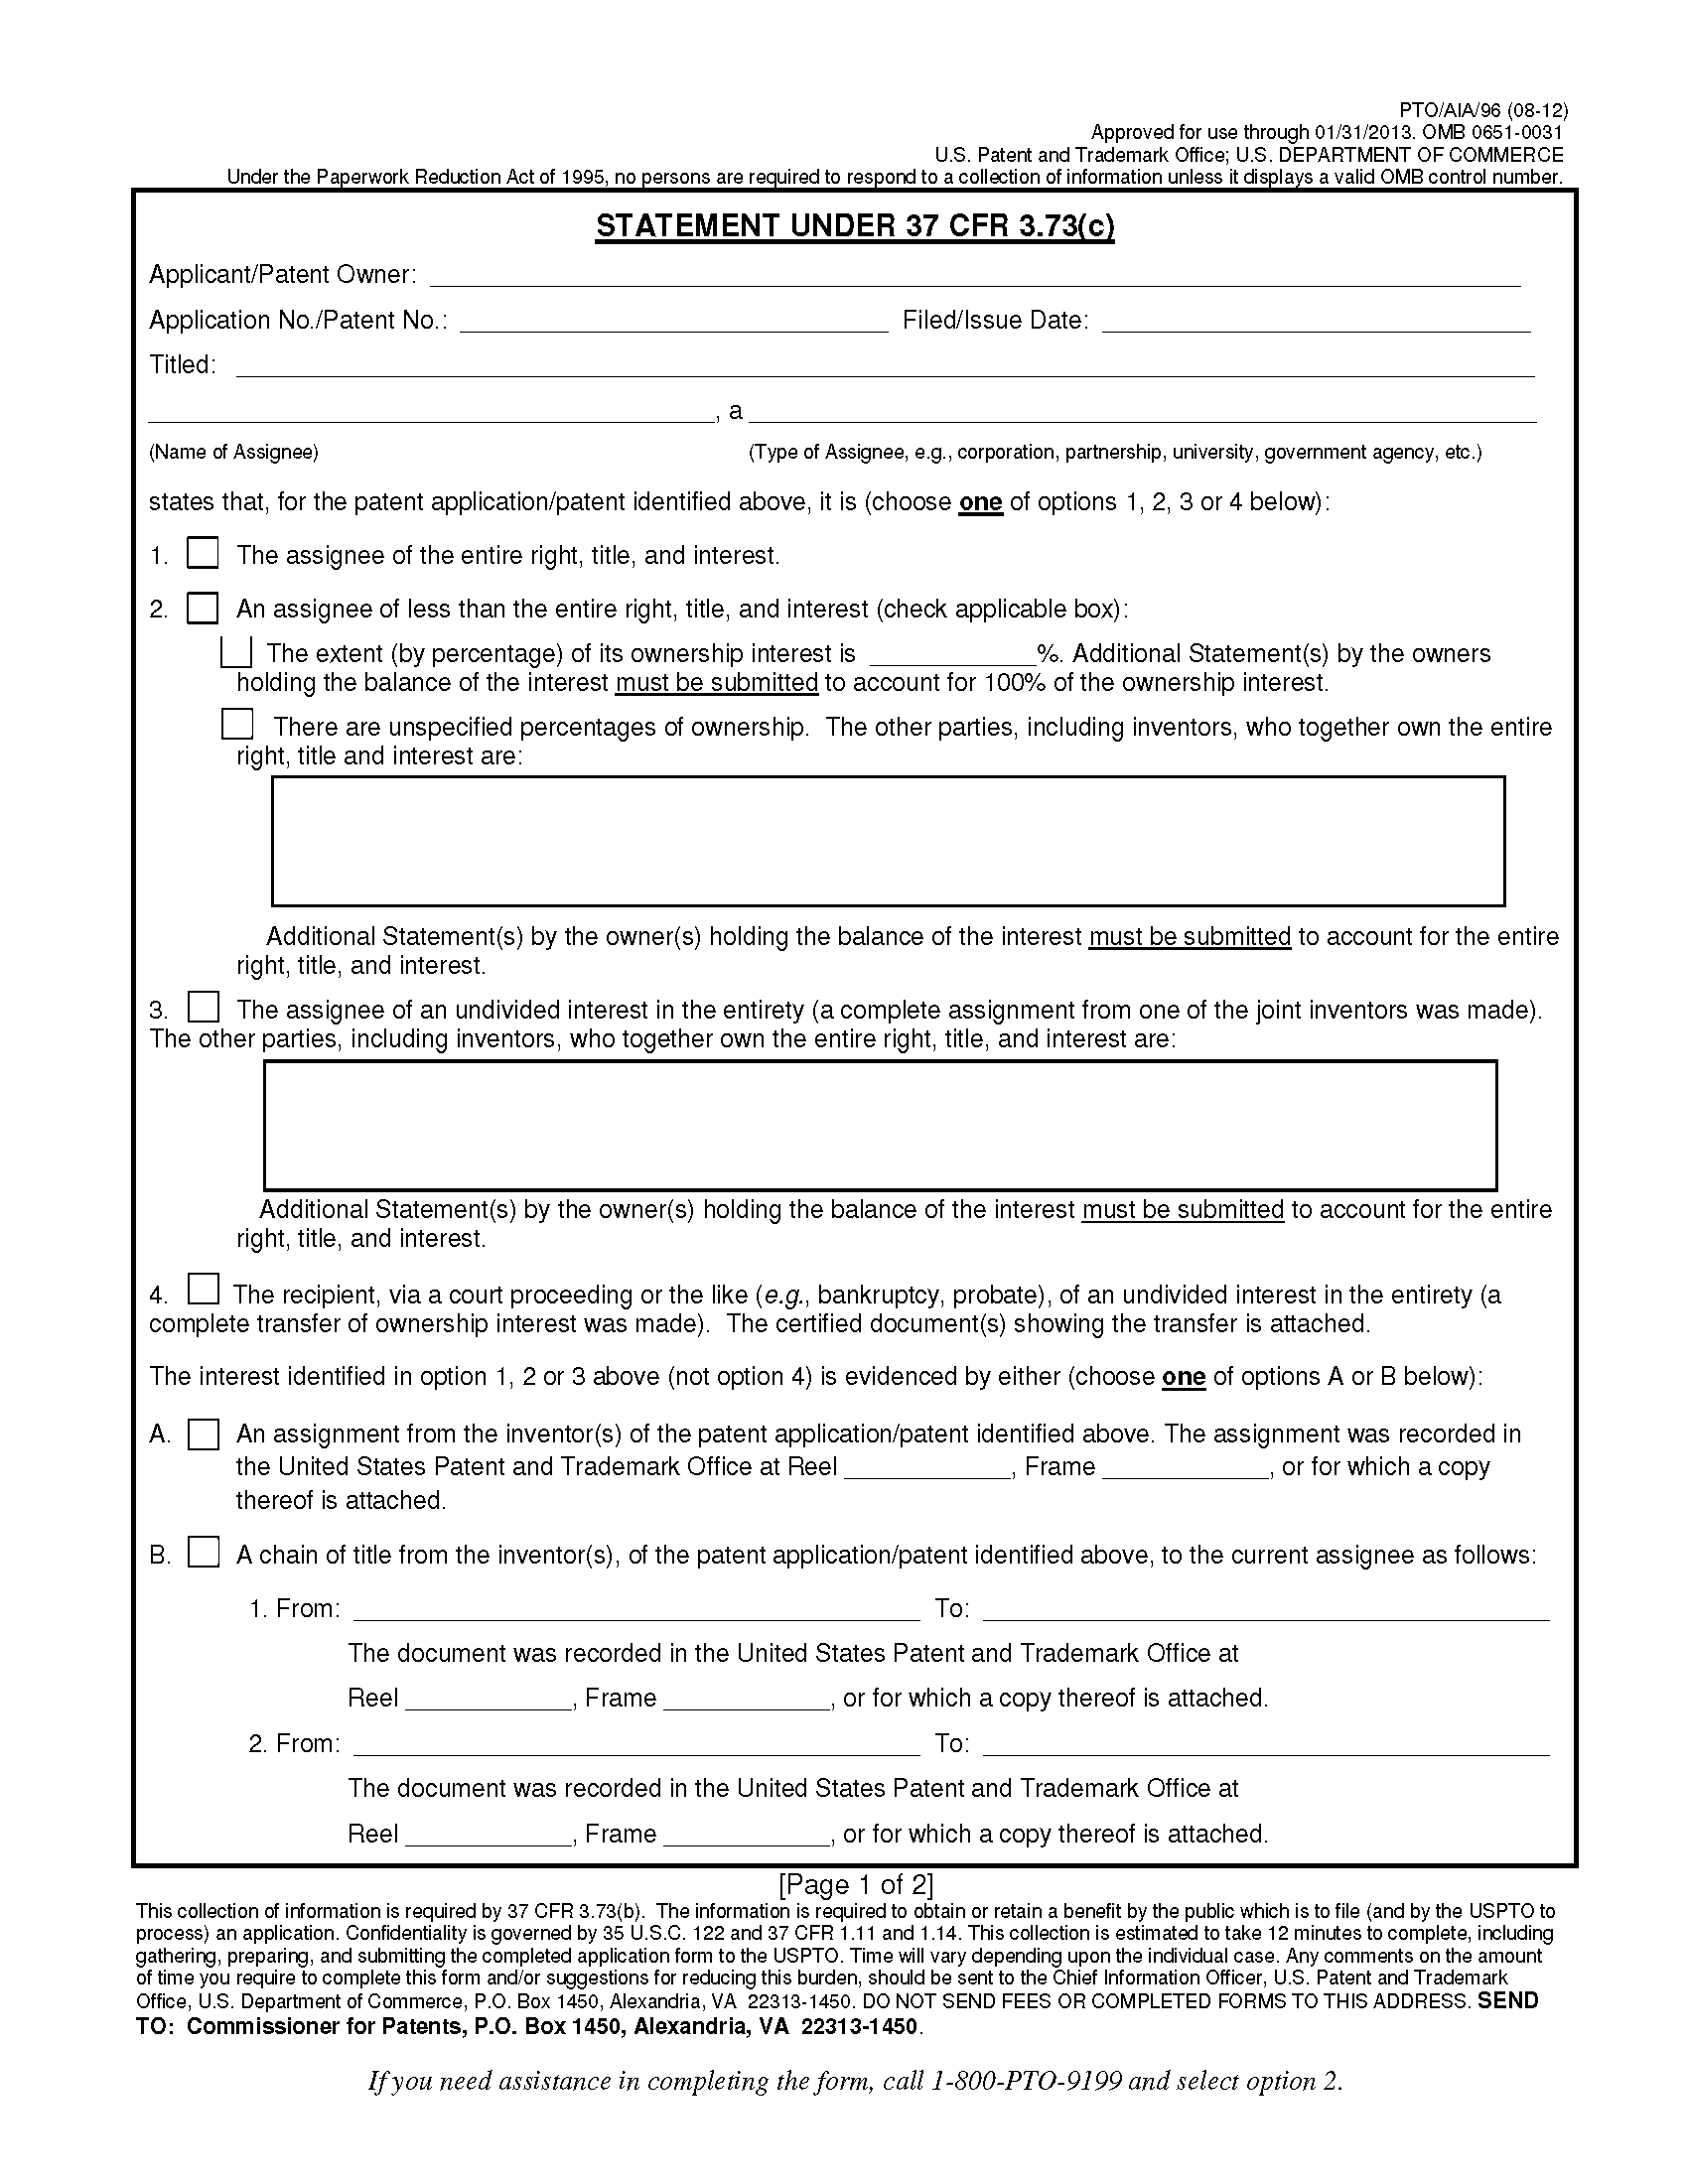 Form PTO/AIA/96. Statement Under 37 CFR 3.73(c), page 1